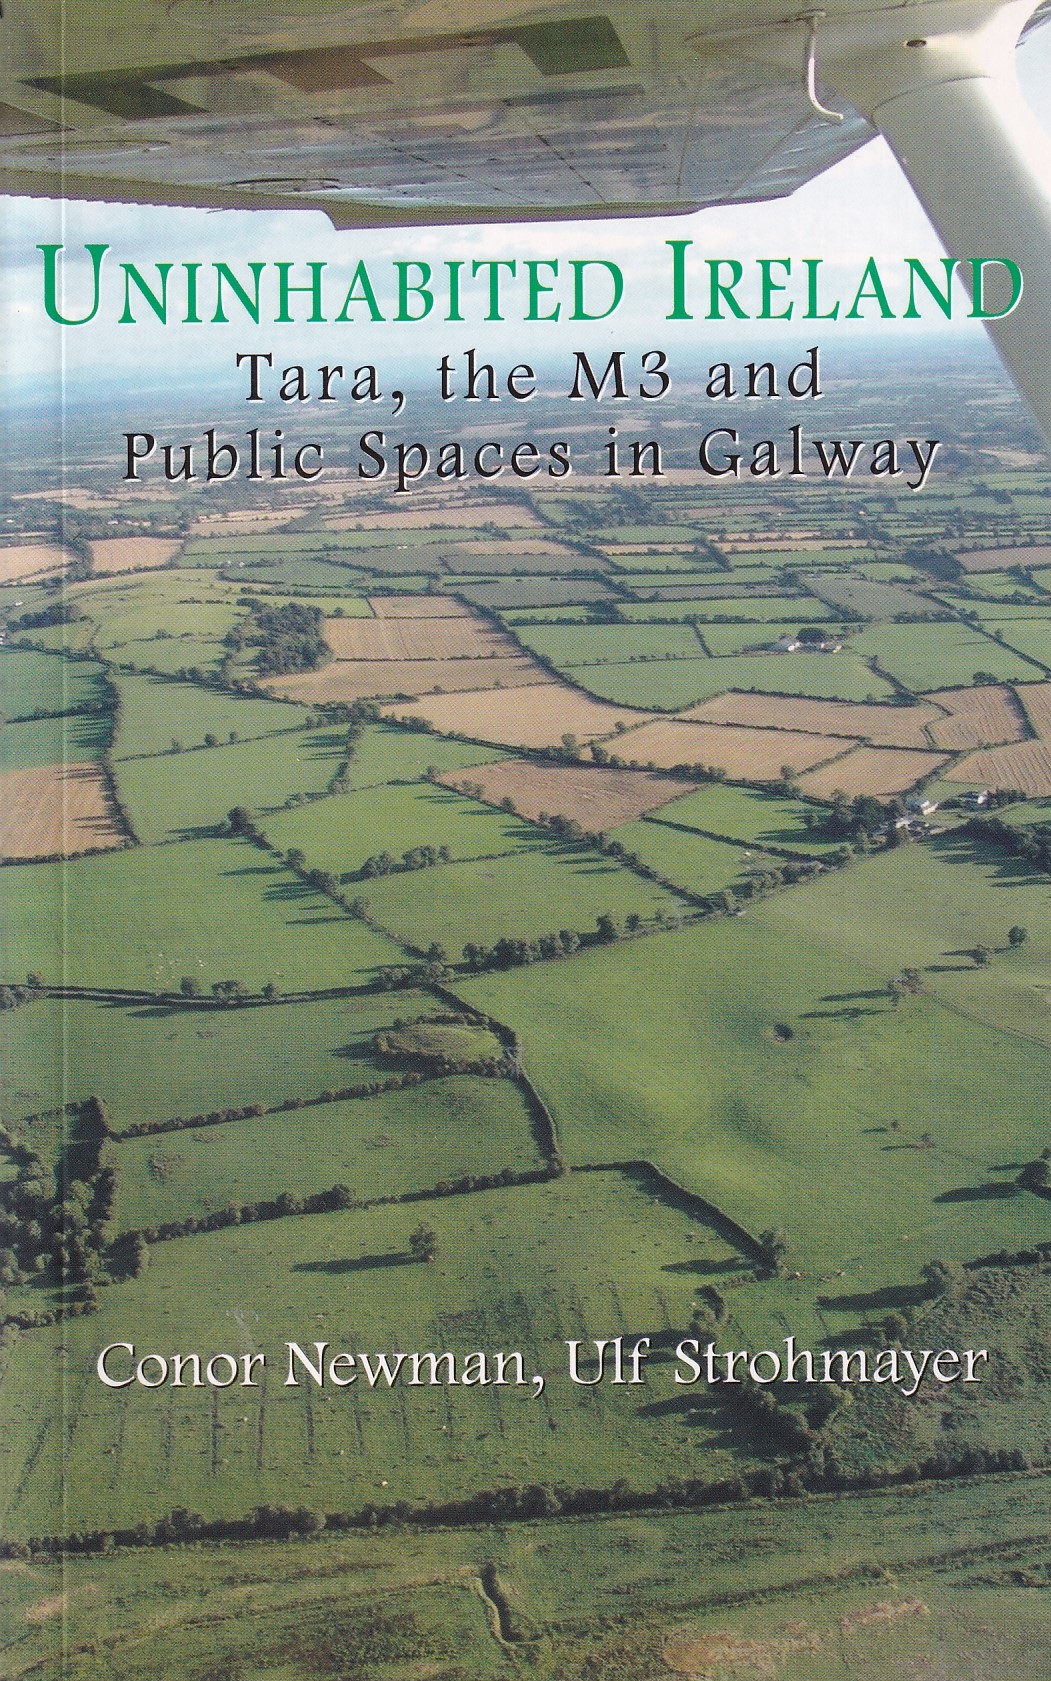 Uninhabited Ireland: Tara, the M3 and Public Spaces in Galway by Conor Newman & Ulf Strohmayer